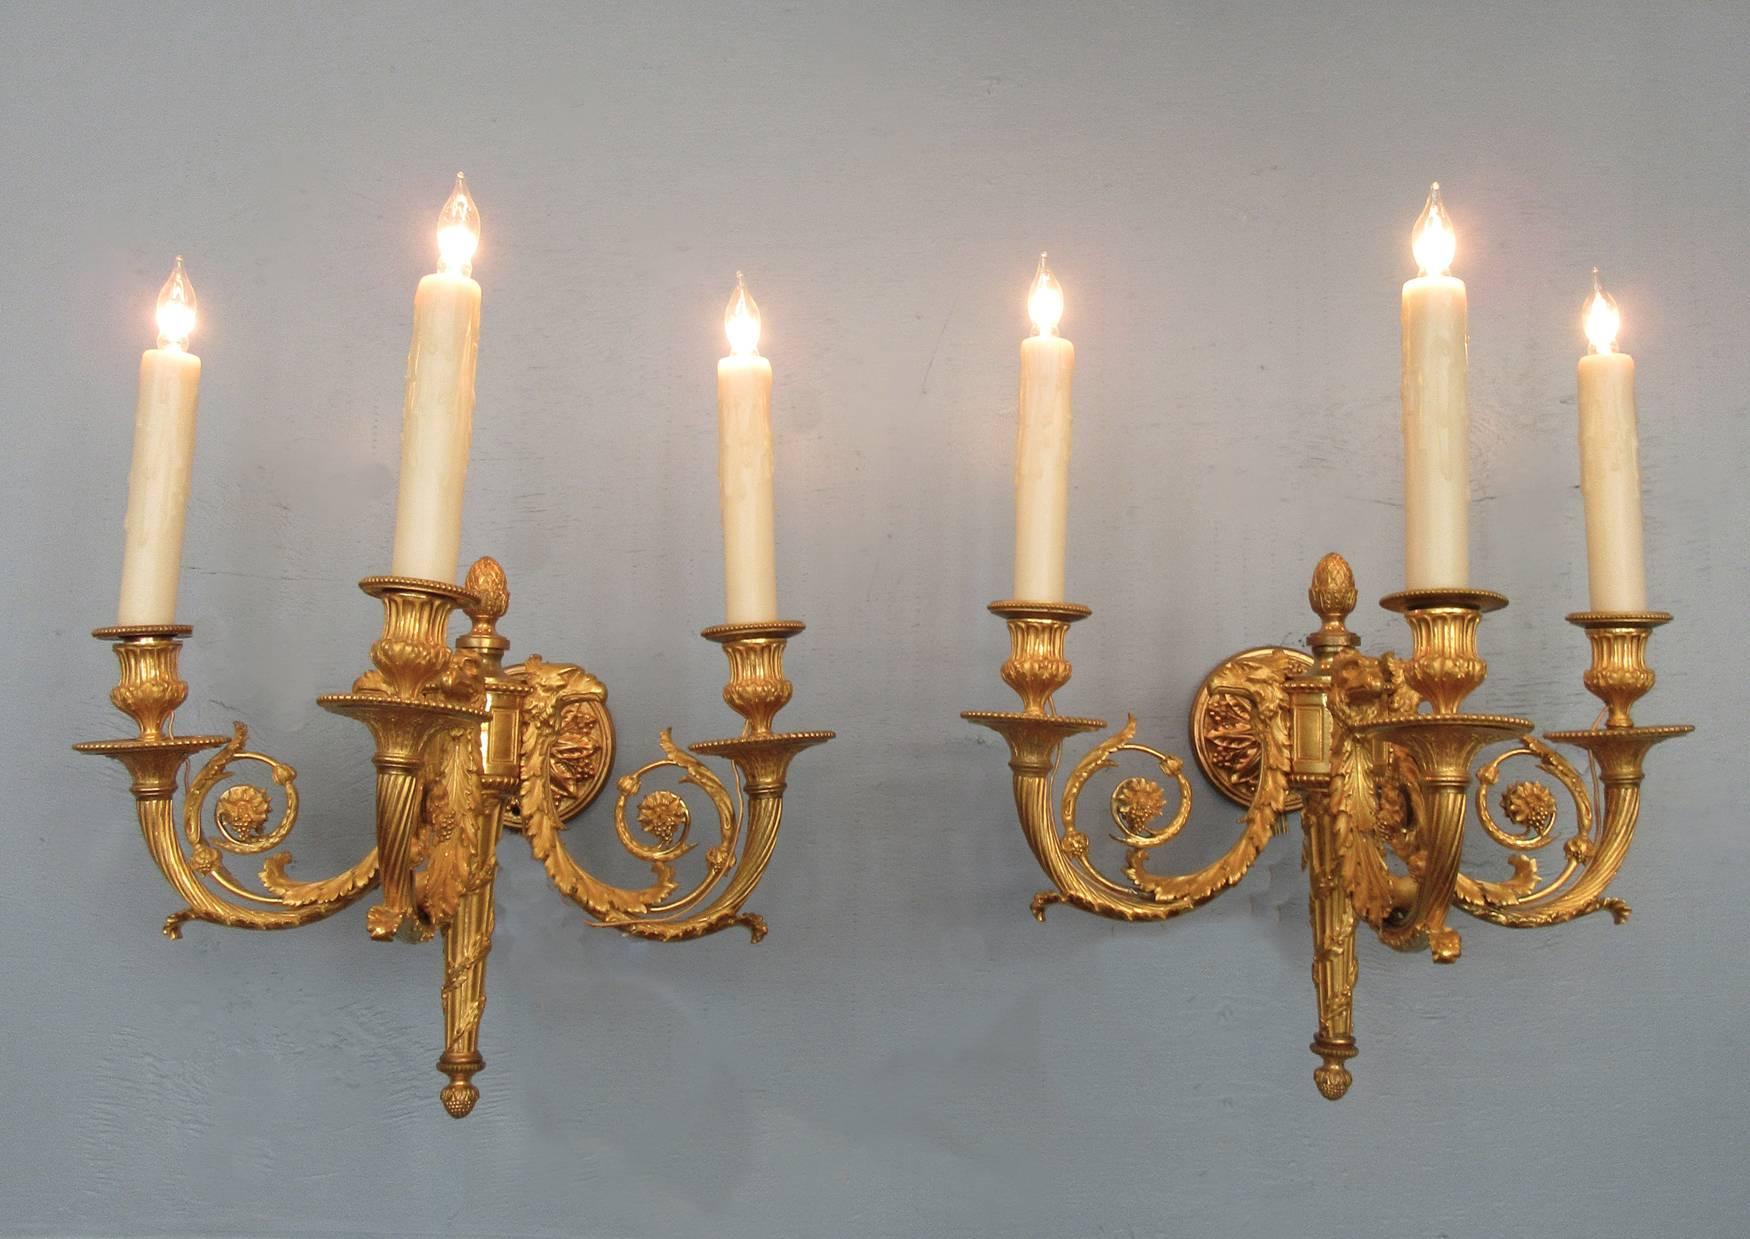 Pair of 19th Century French Empire Bronze Dore Sconces with Exceptional Casting In Good Condition For Sale In Charleston, SC